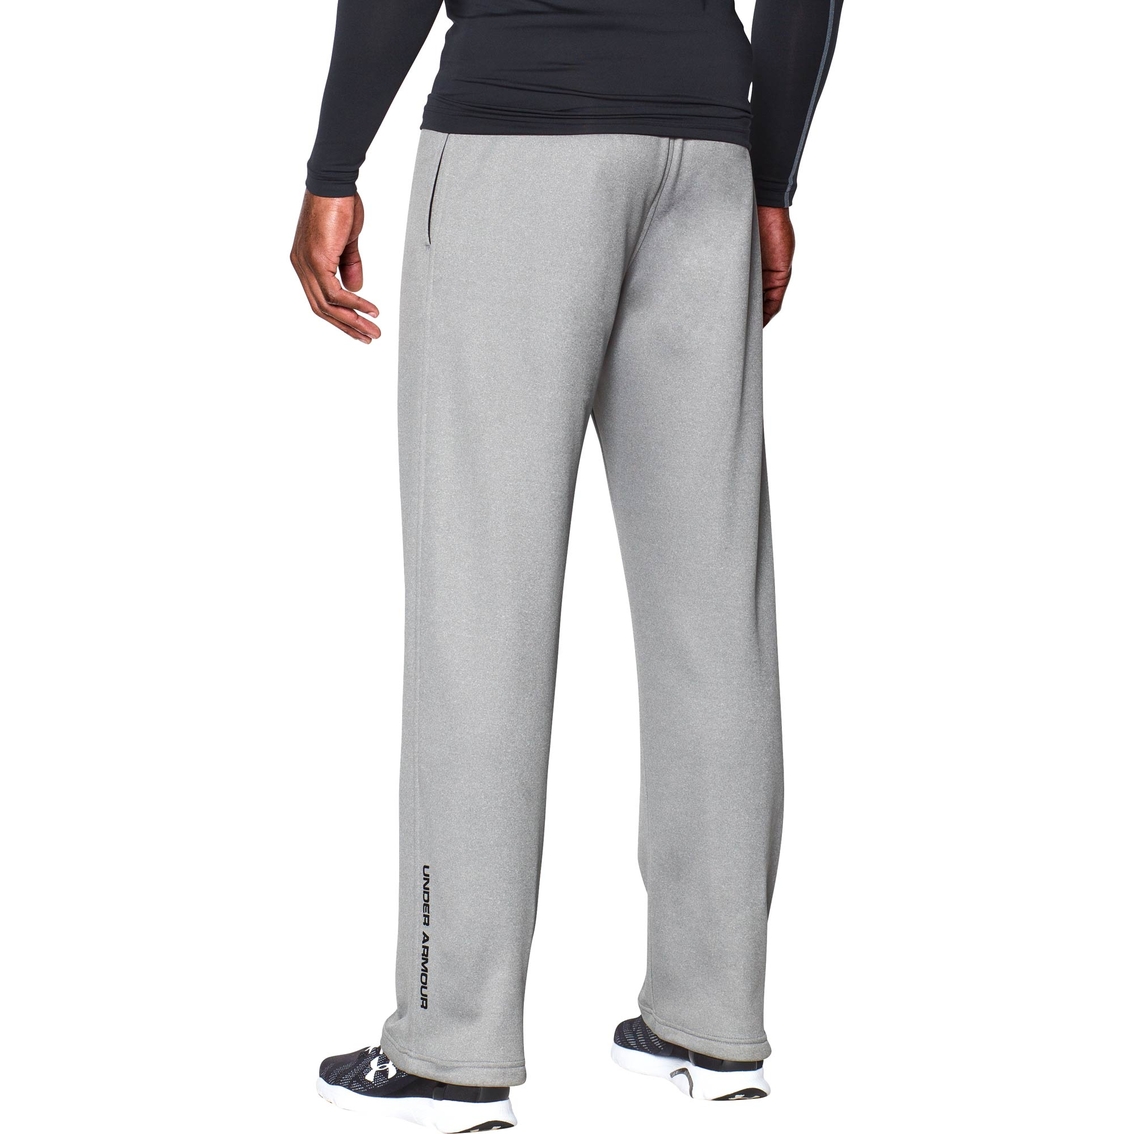 Under Armour Ua Armour Fleece In The Zone Pants